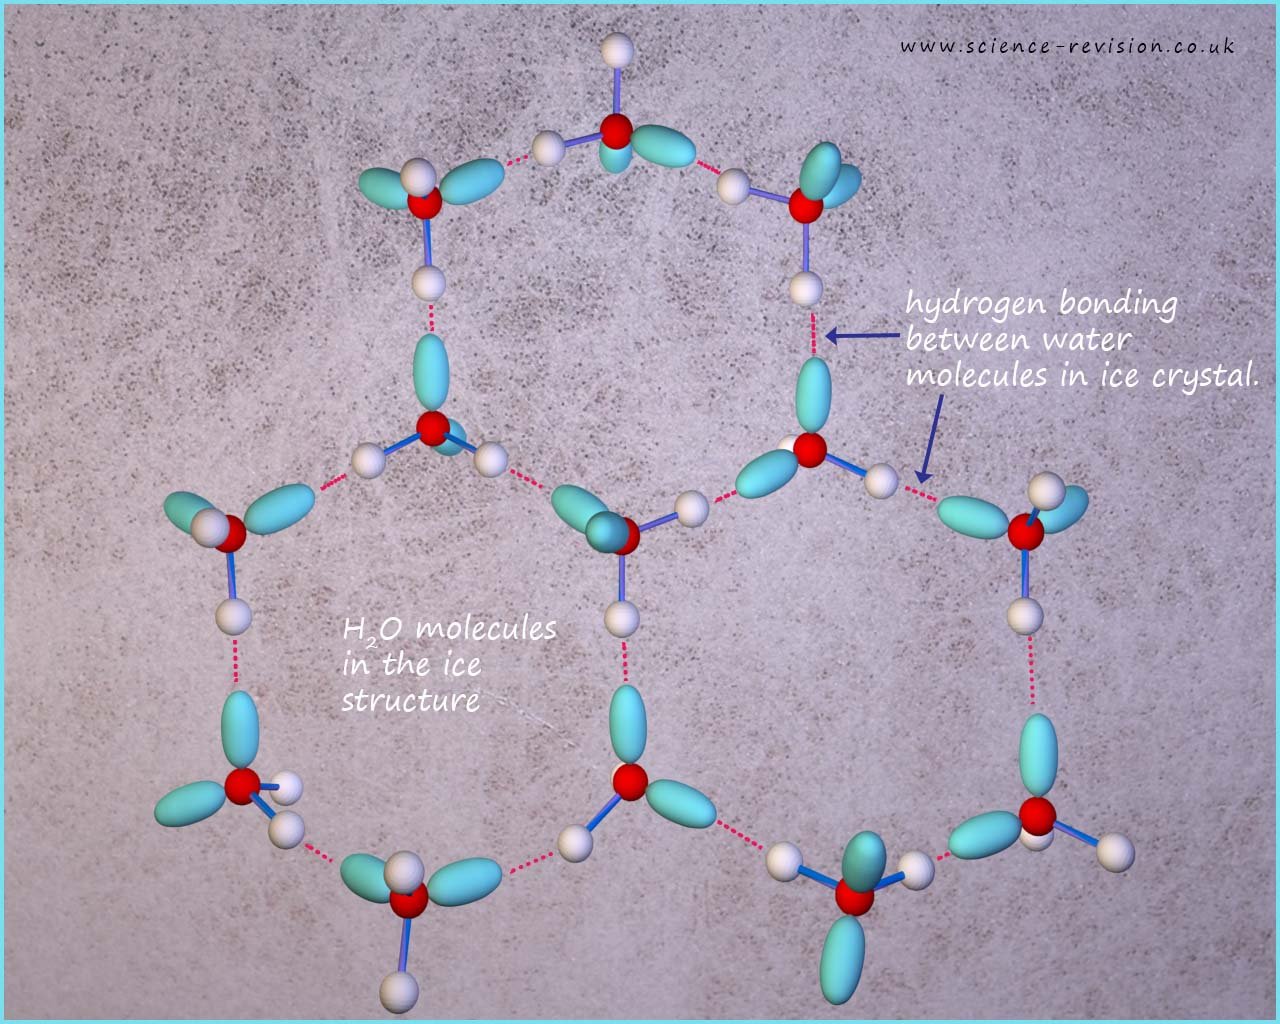 3d model showing the structure of ice with the extended hydrogen bonds shown.